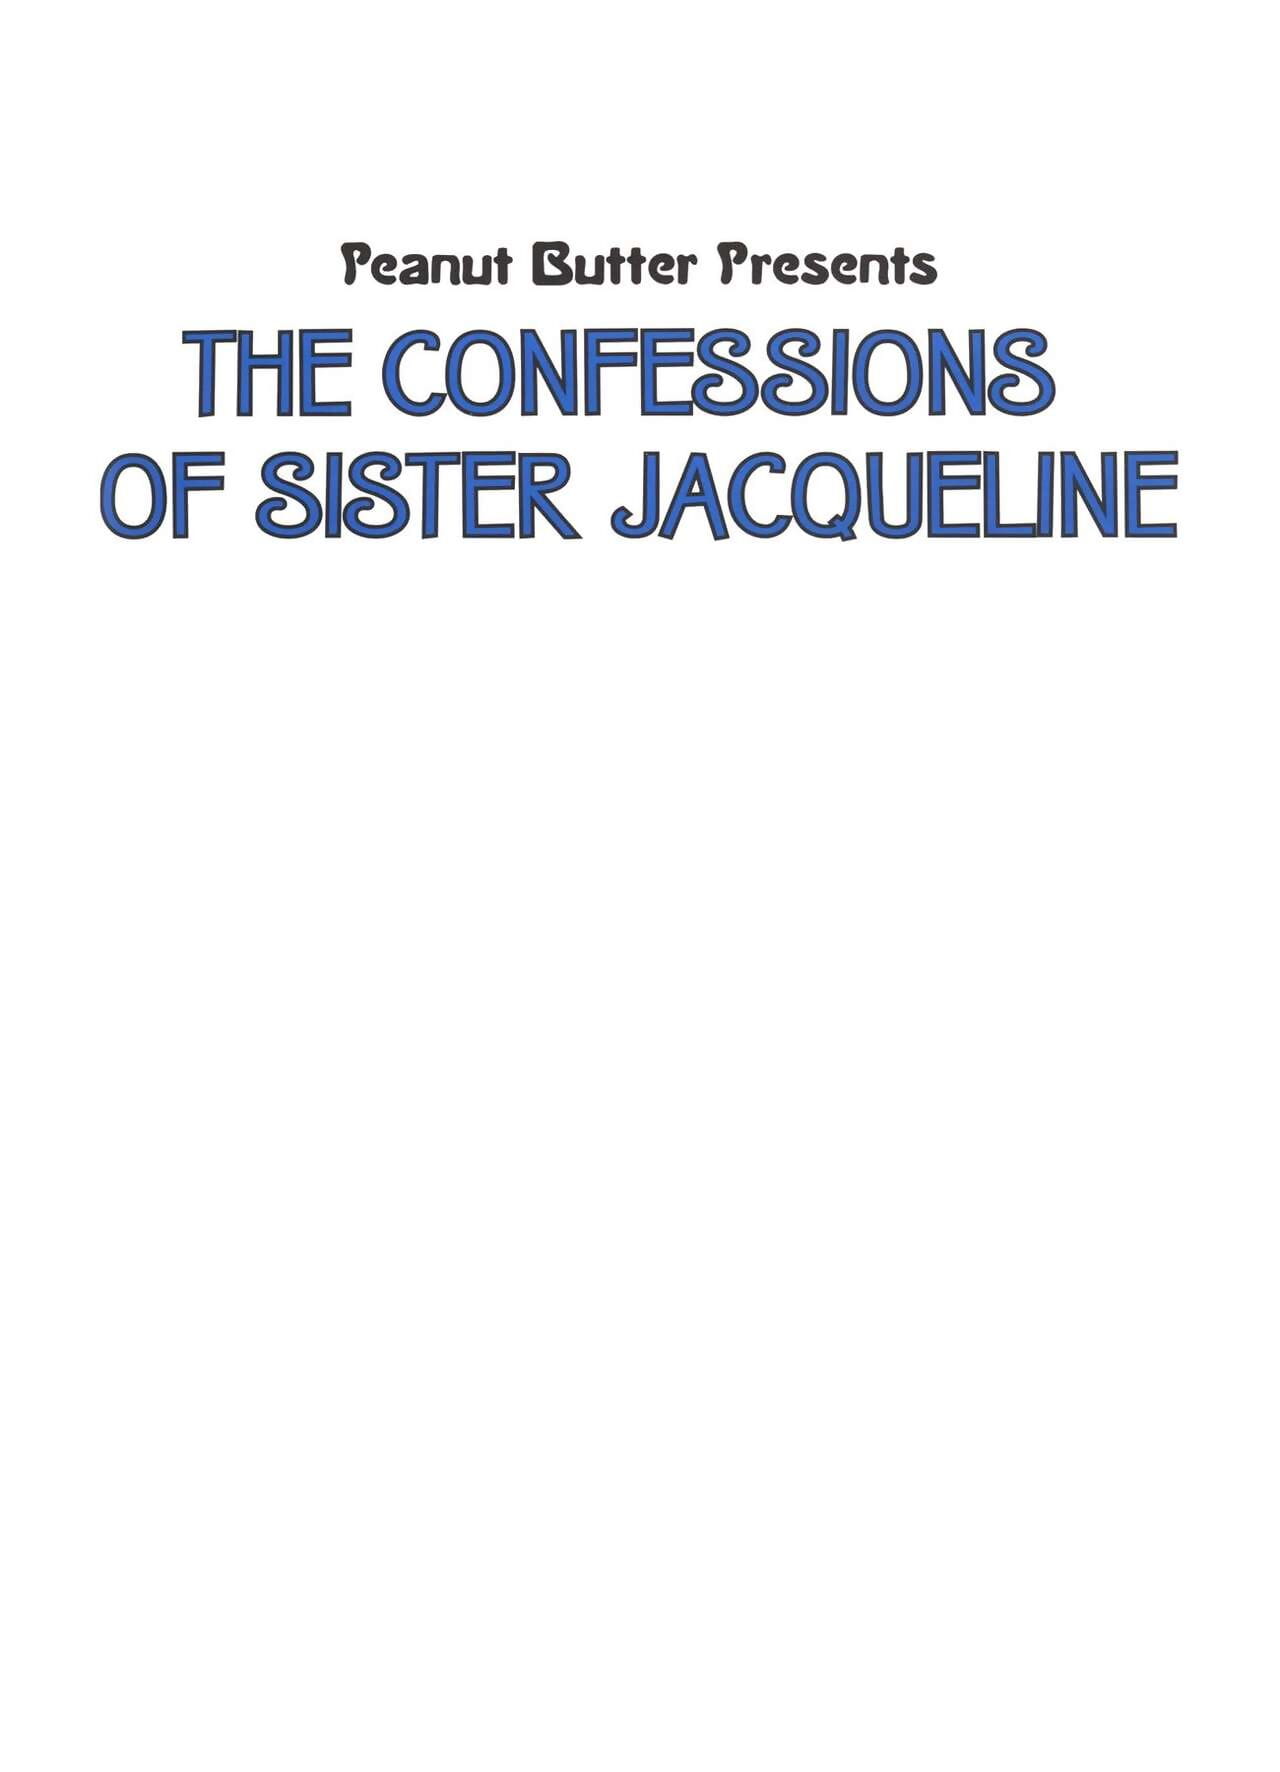 Peanut Butter: The Confessisons of Sister Jacqueline page 1